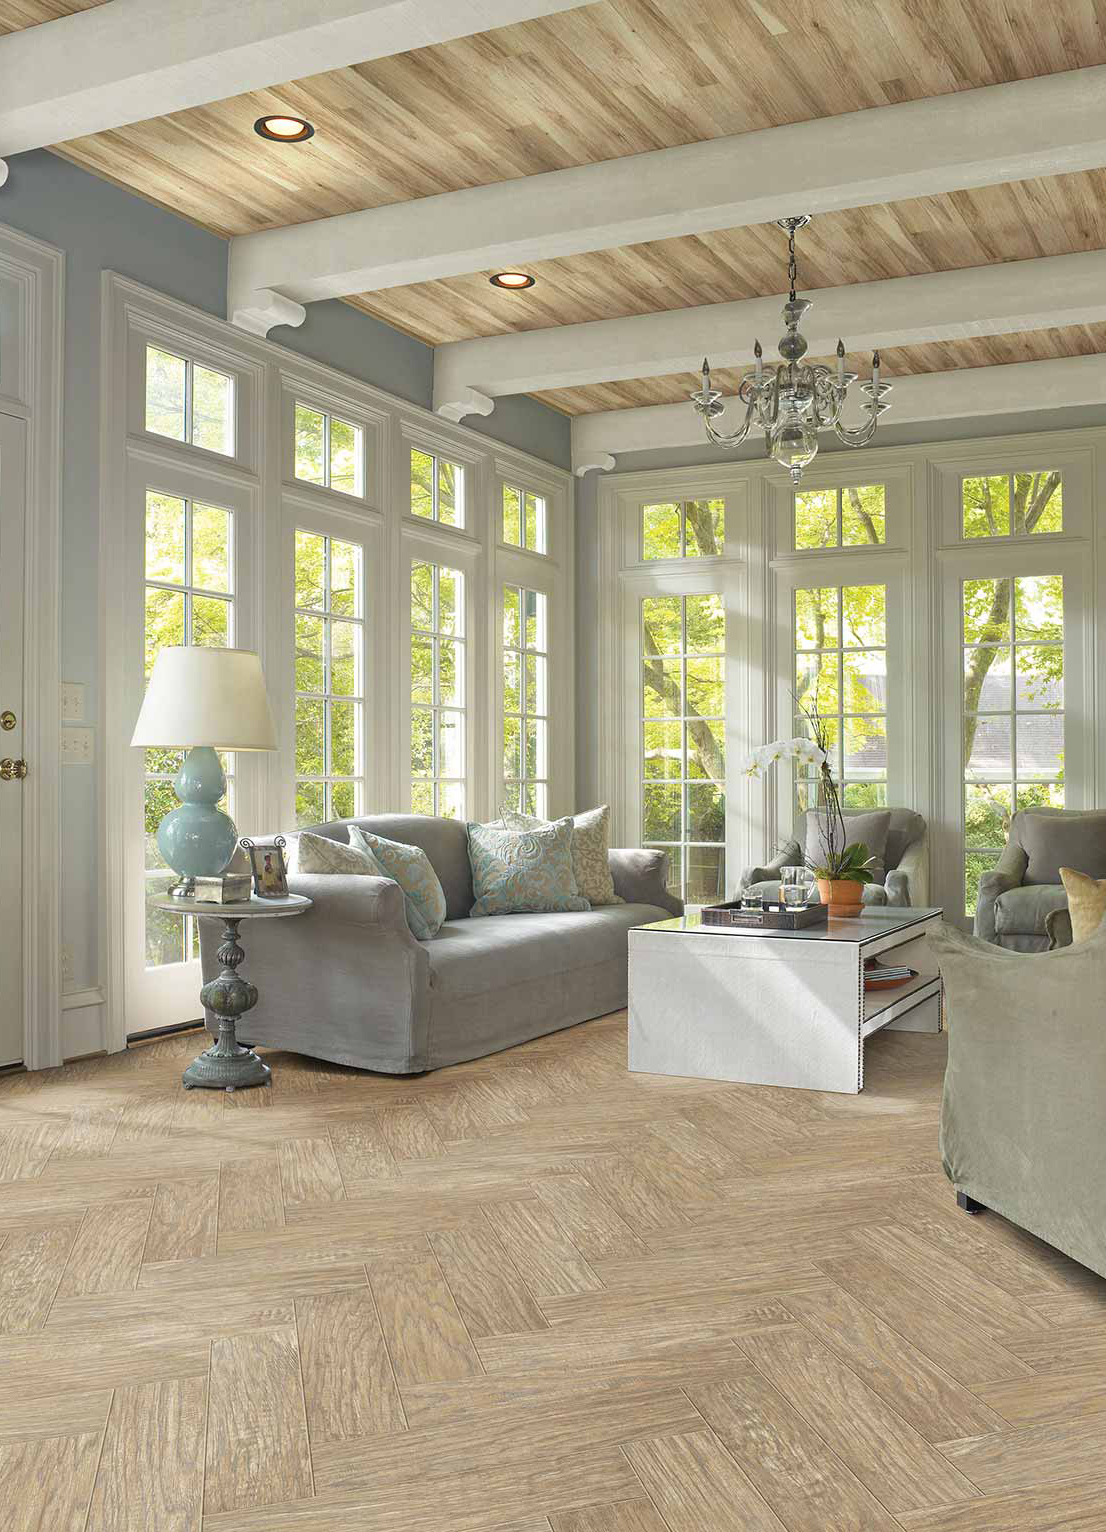 Grand Summit Laminate by Shaw Floors. Featuring bright, living room scene with french windows, gray furnishings and rustic beam ceiling